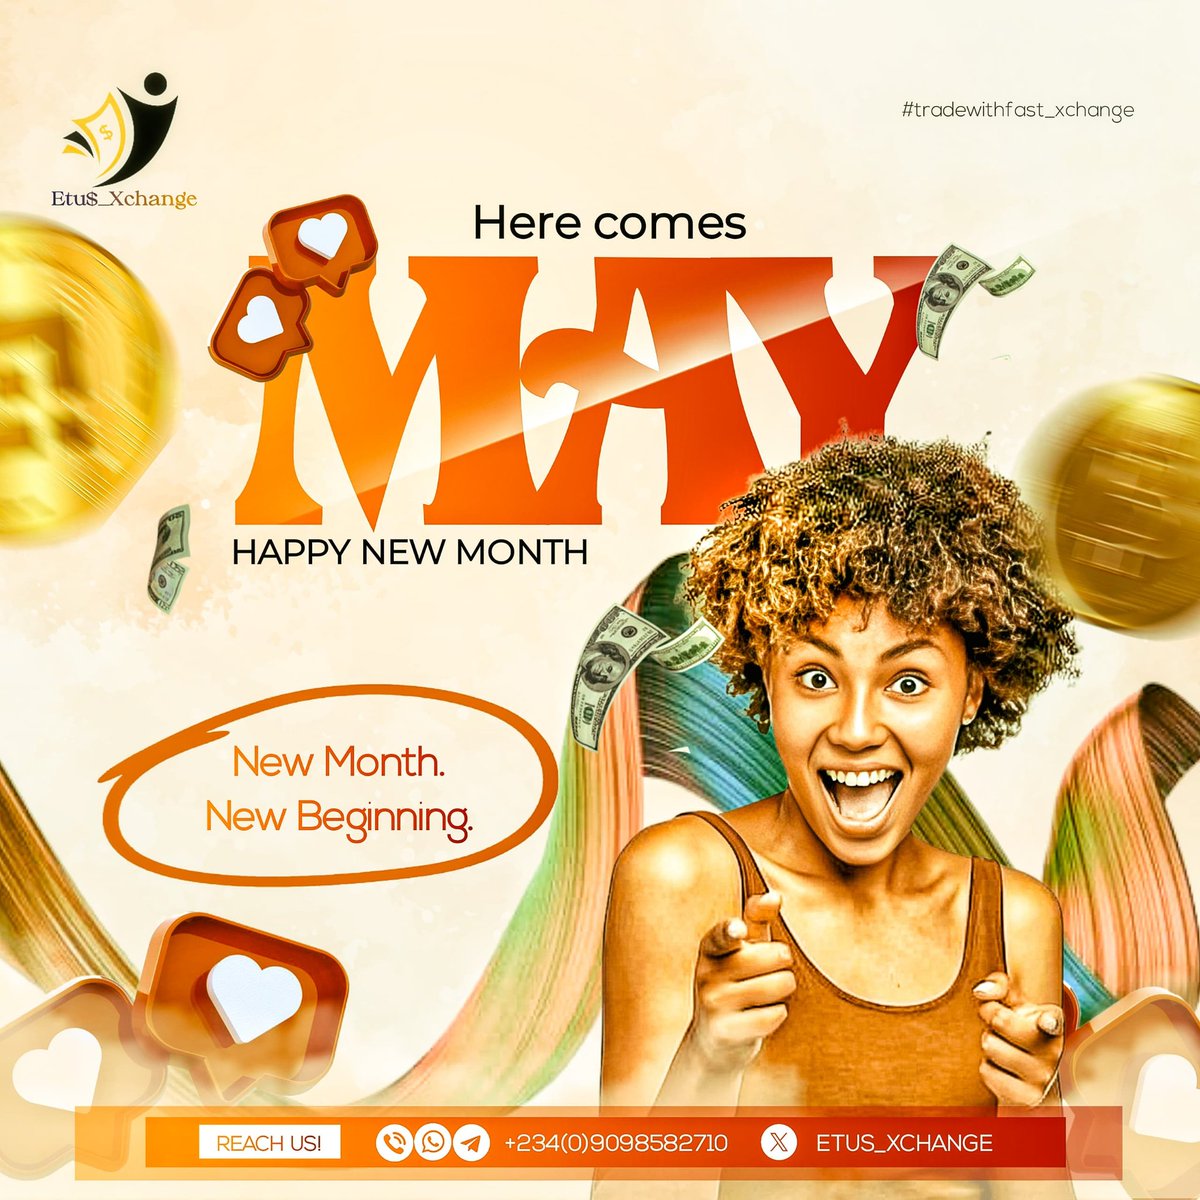 This month will be filled with abundance good vibes, happiness, prosperity, blessings, growth, peace and love. Good Morning & Happy New Month My People. Active for all your Digital Assets deals! 💯